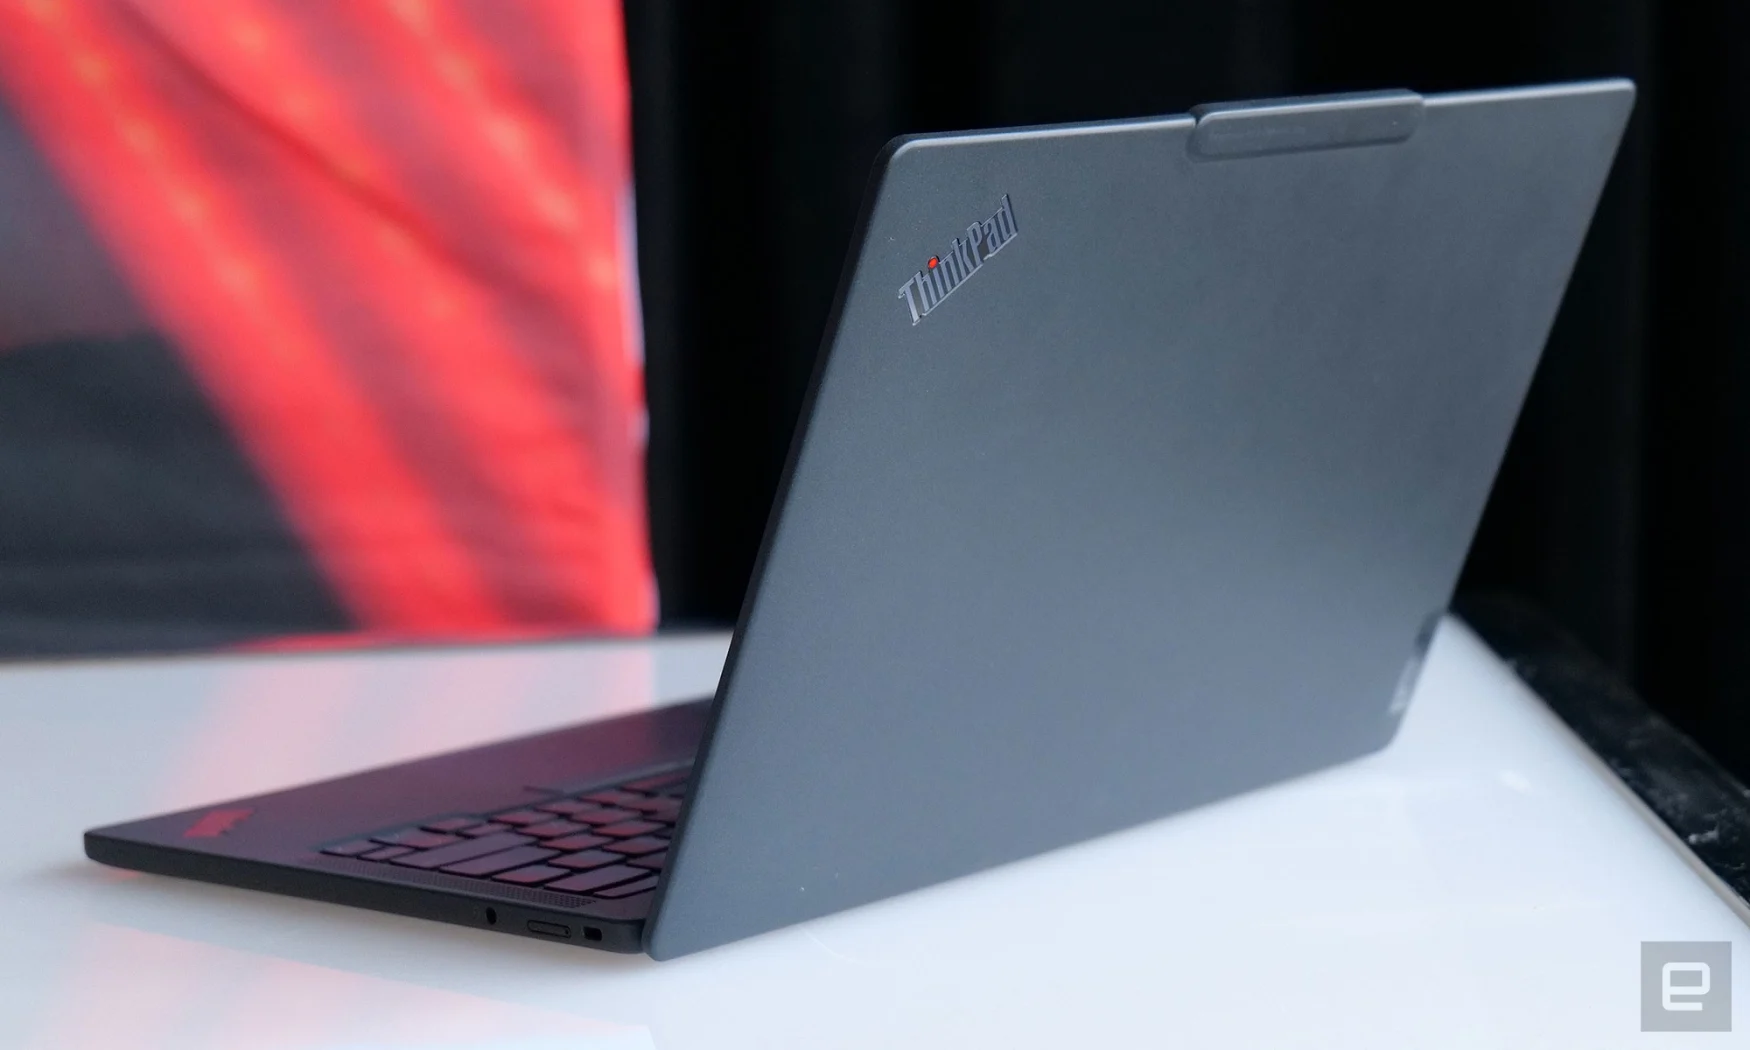 The ThinkPad X13s is made from 90 percent recycled magnesium.